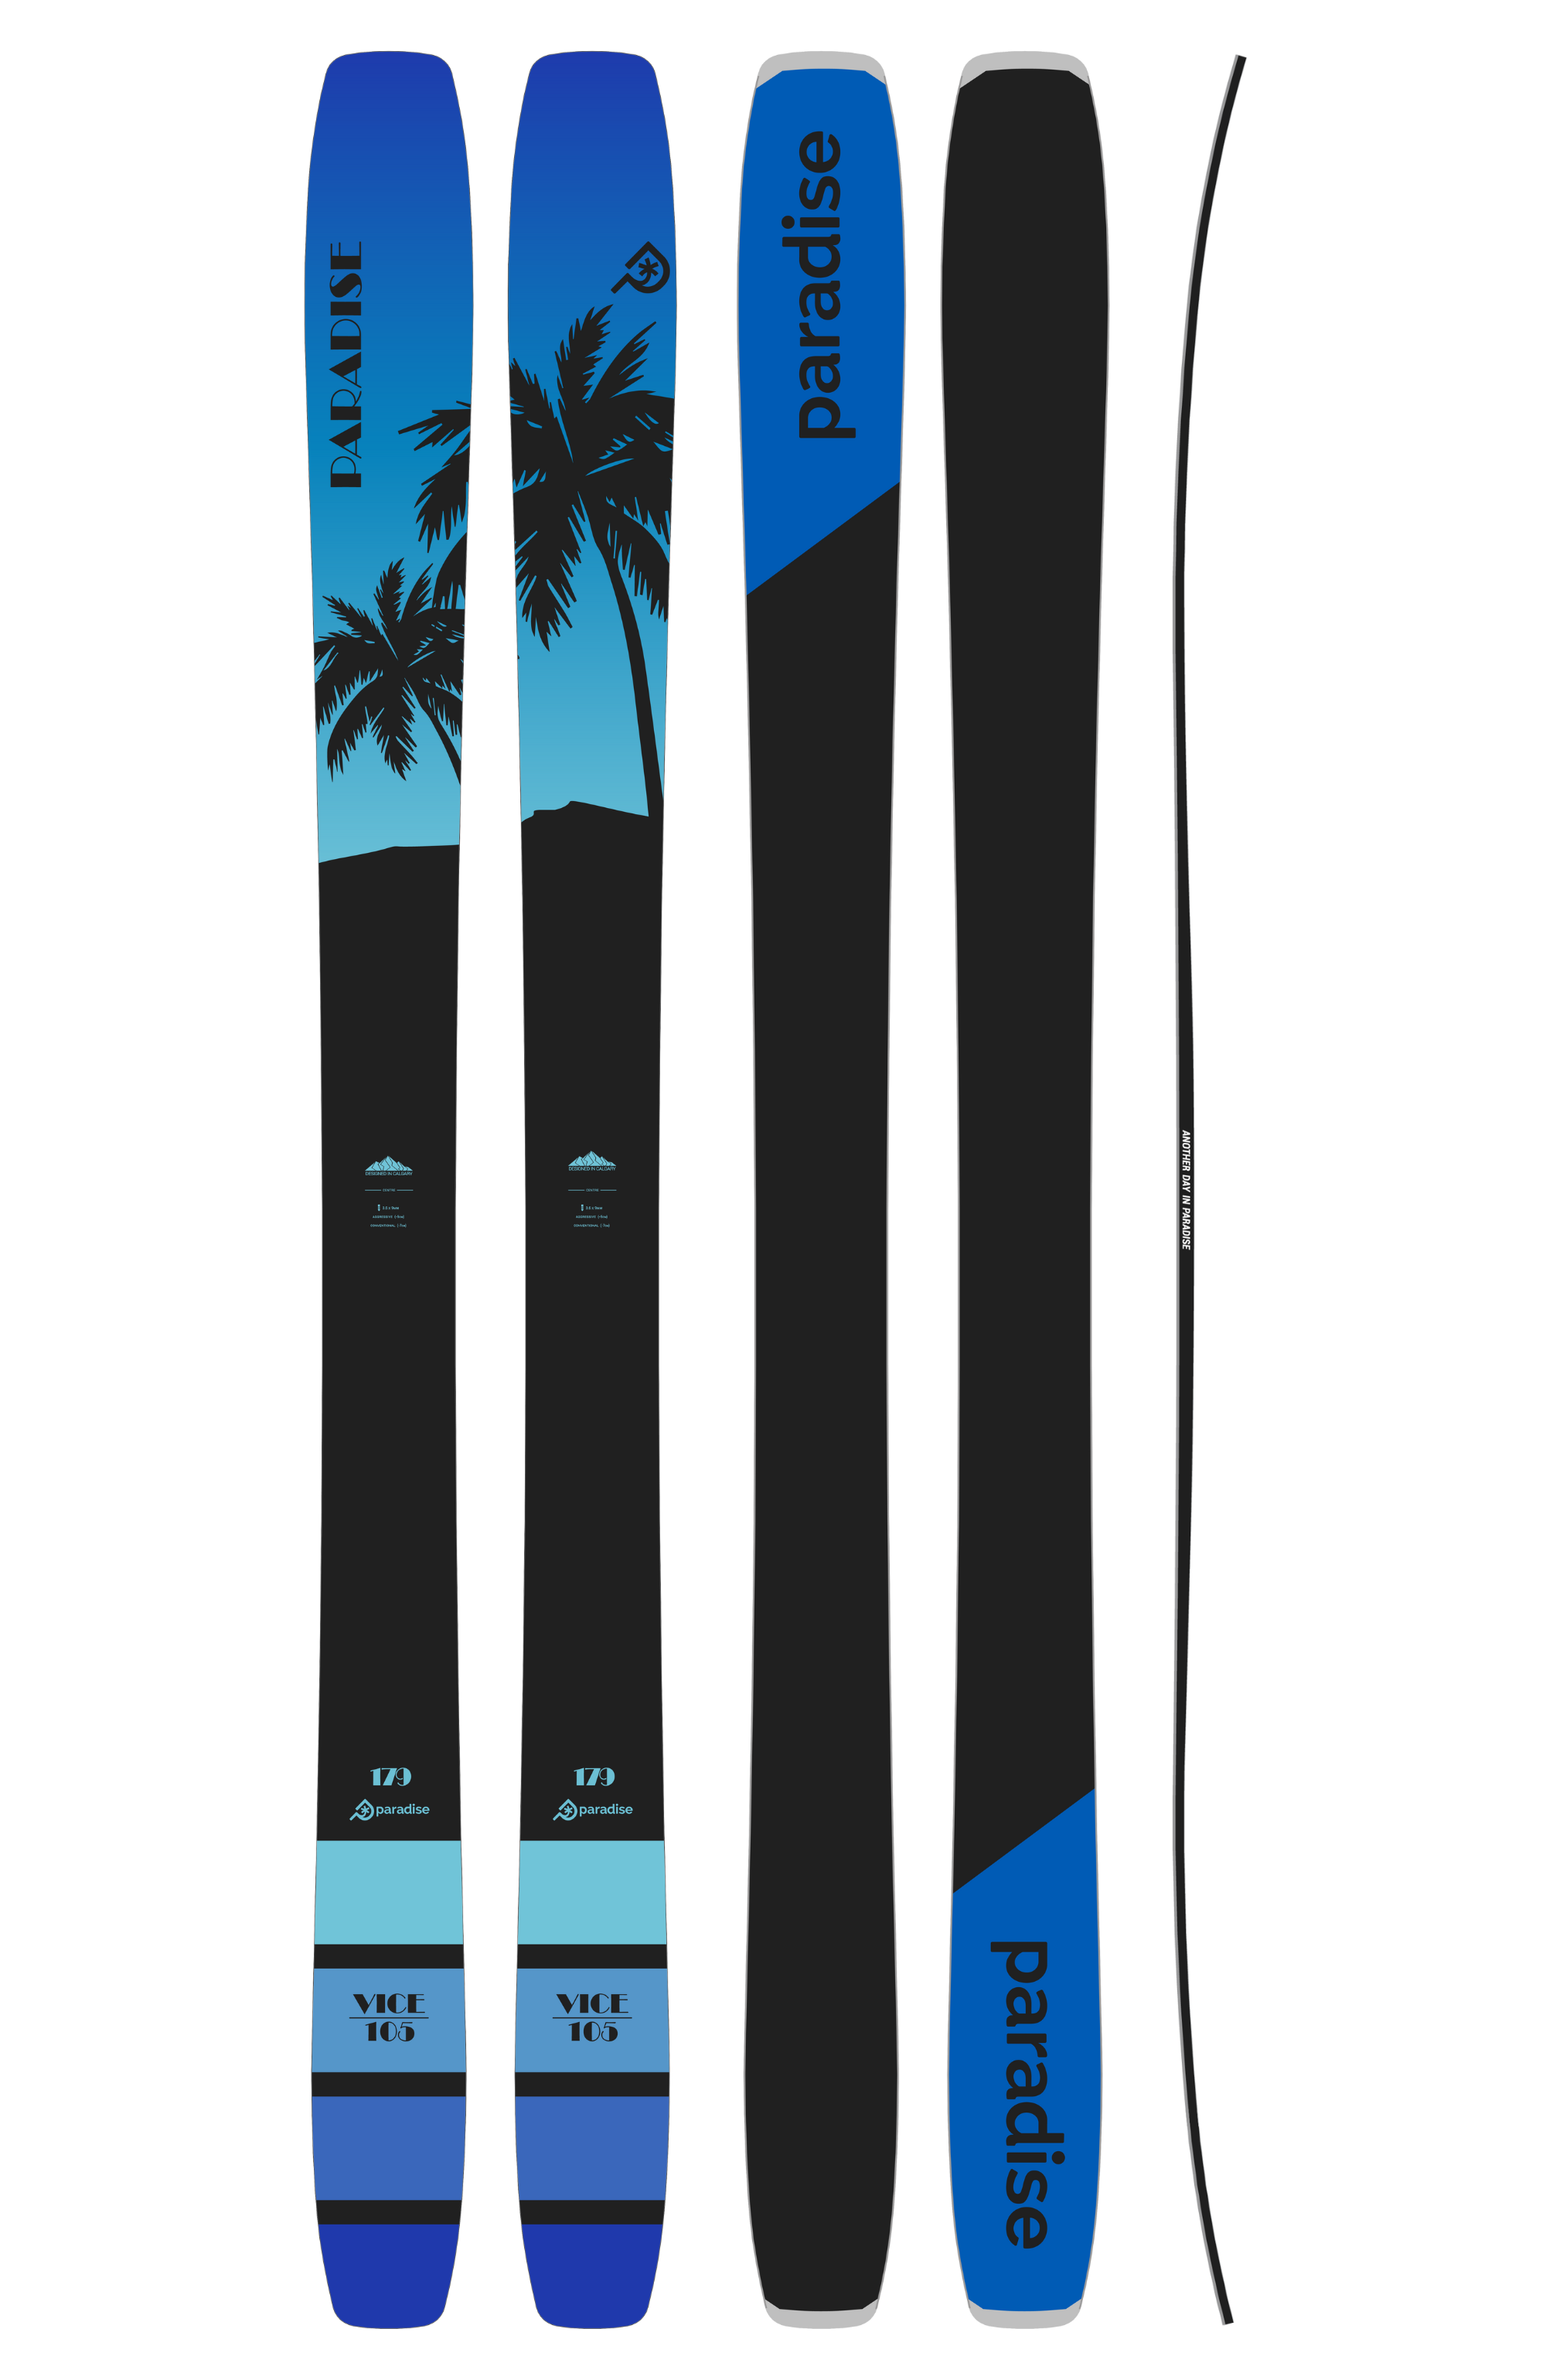 The unisex VICE 105 freeride ski. Showing the anti ice/scratch top sheet, sintered base, and rocker-camber-rocker profile.